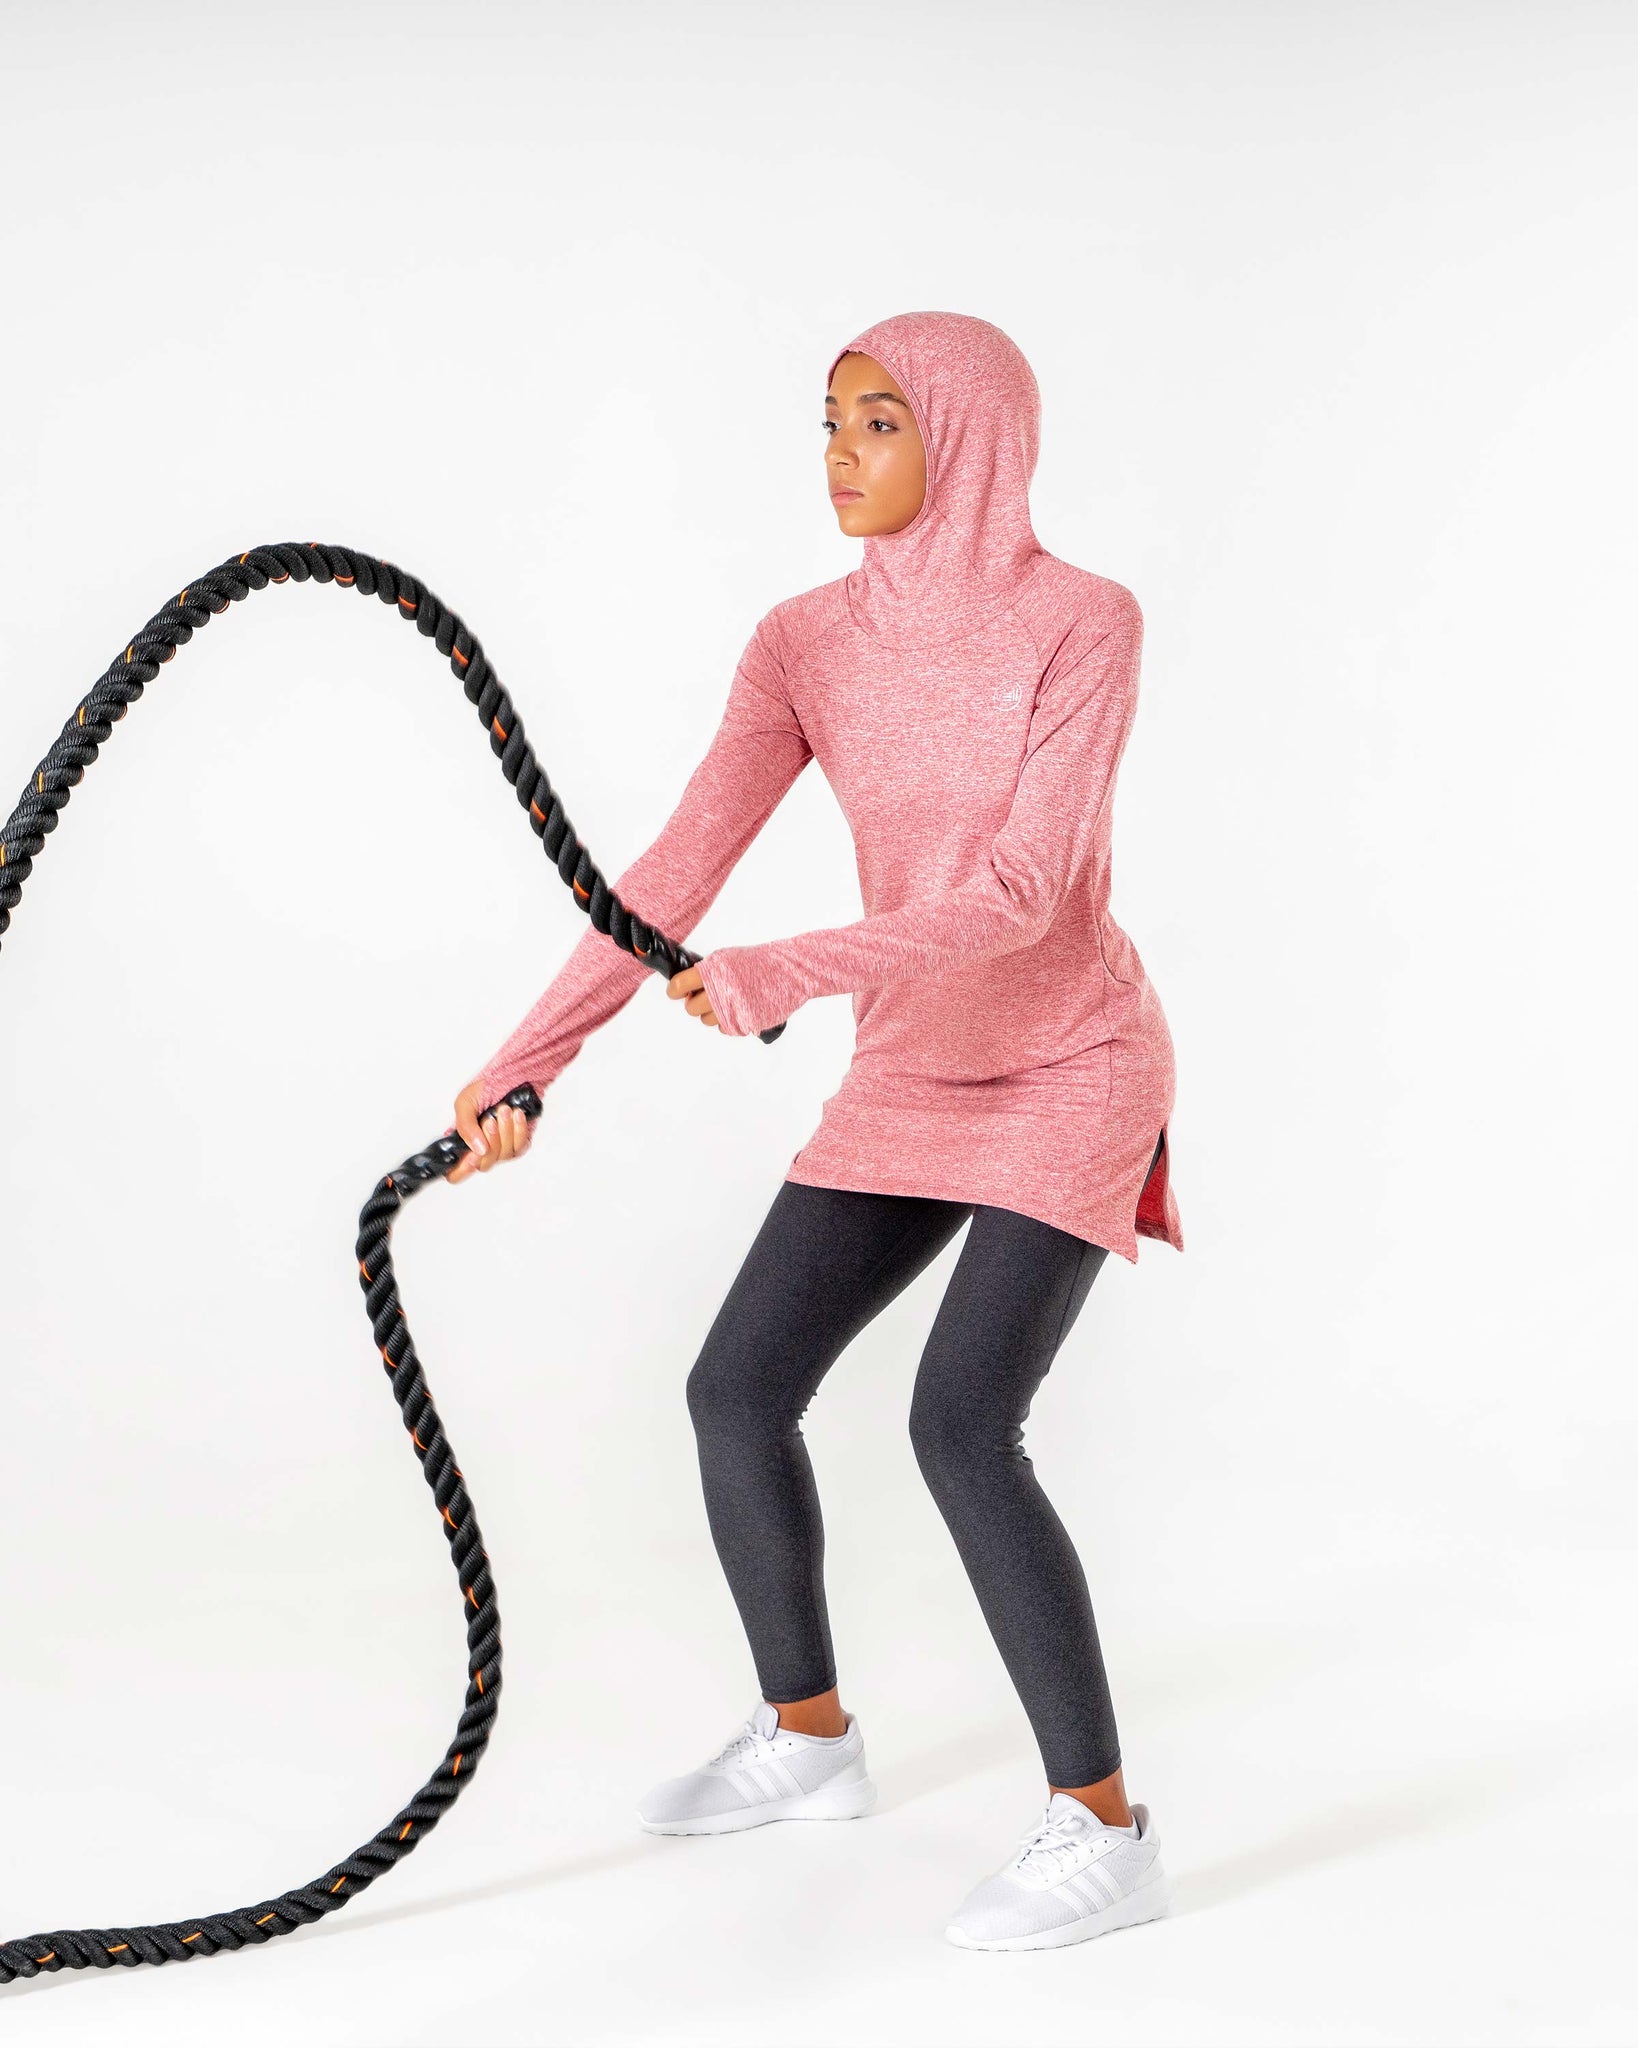 Halo Running Hoodie in heathered red by Veil Garments. Modest activewear collection.